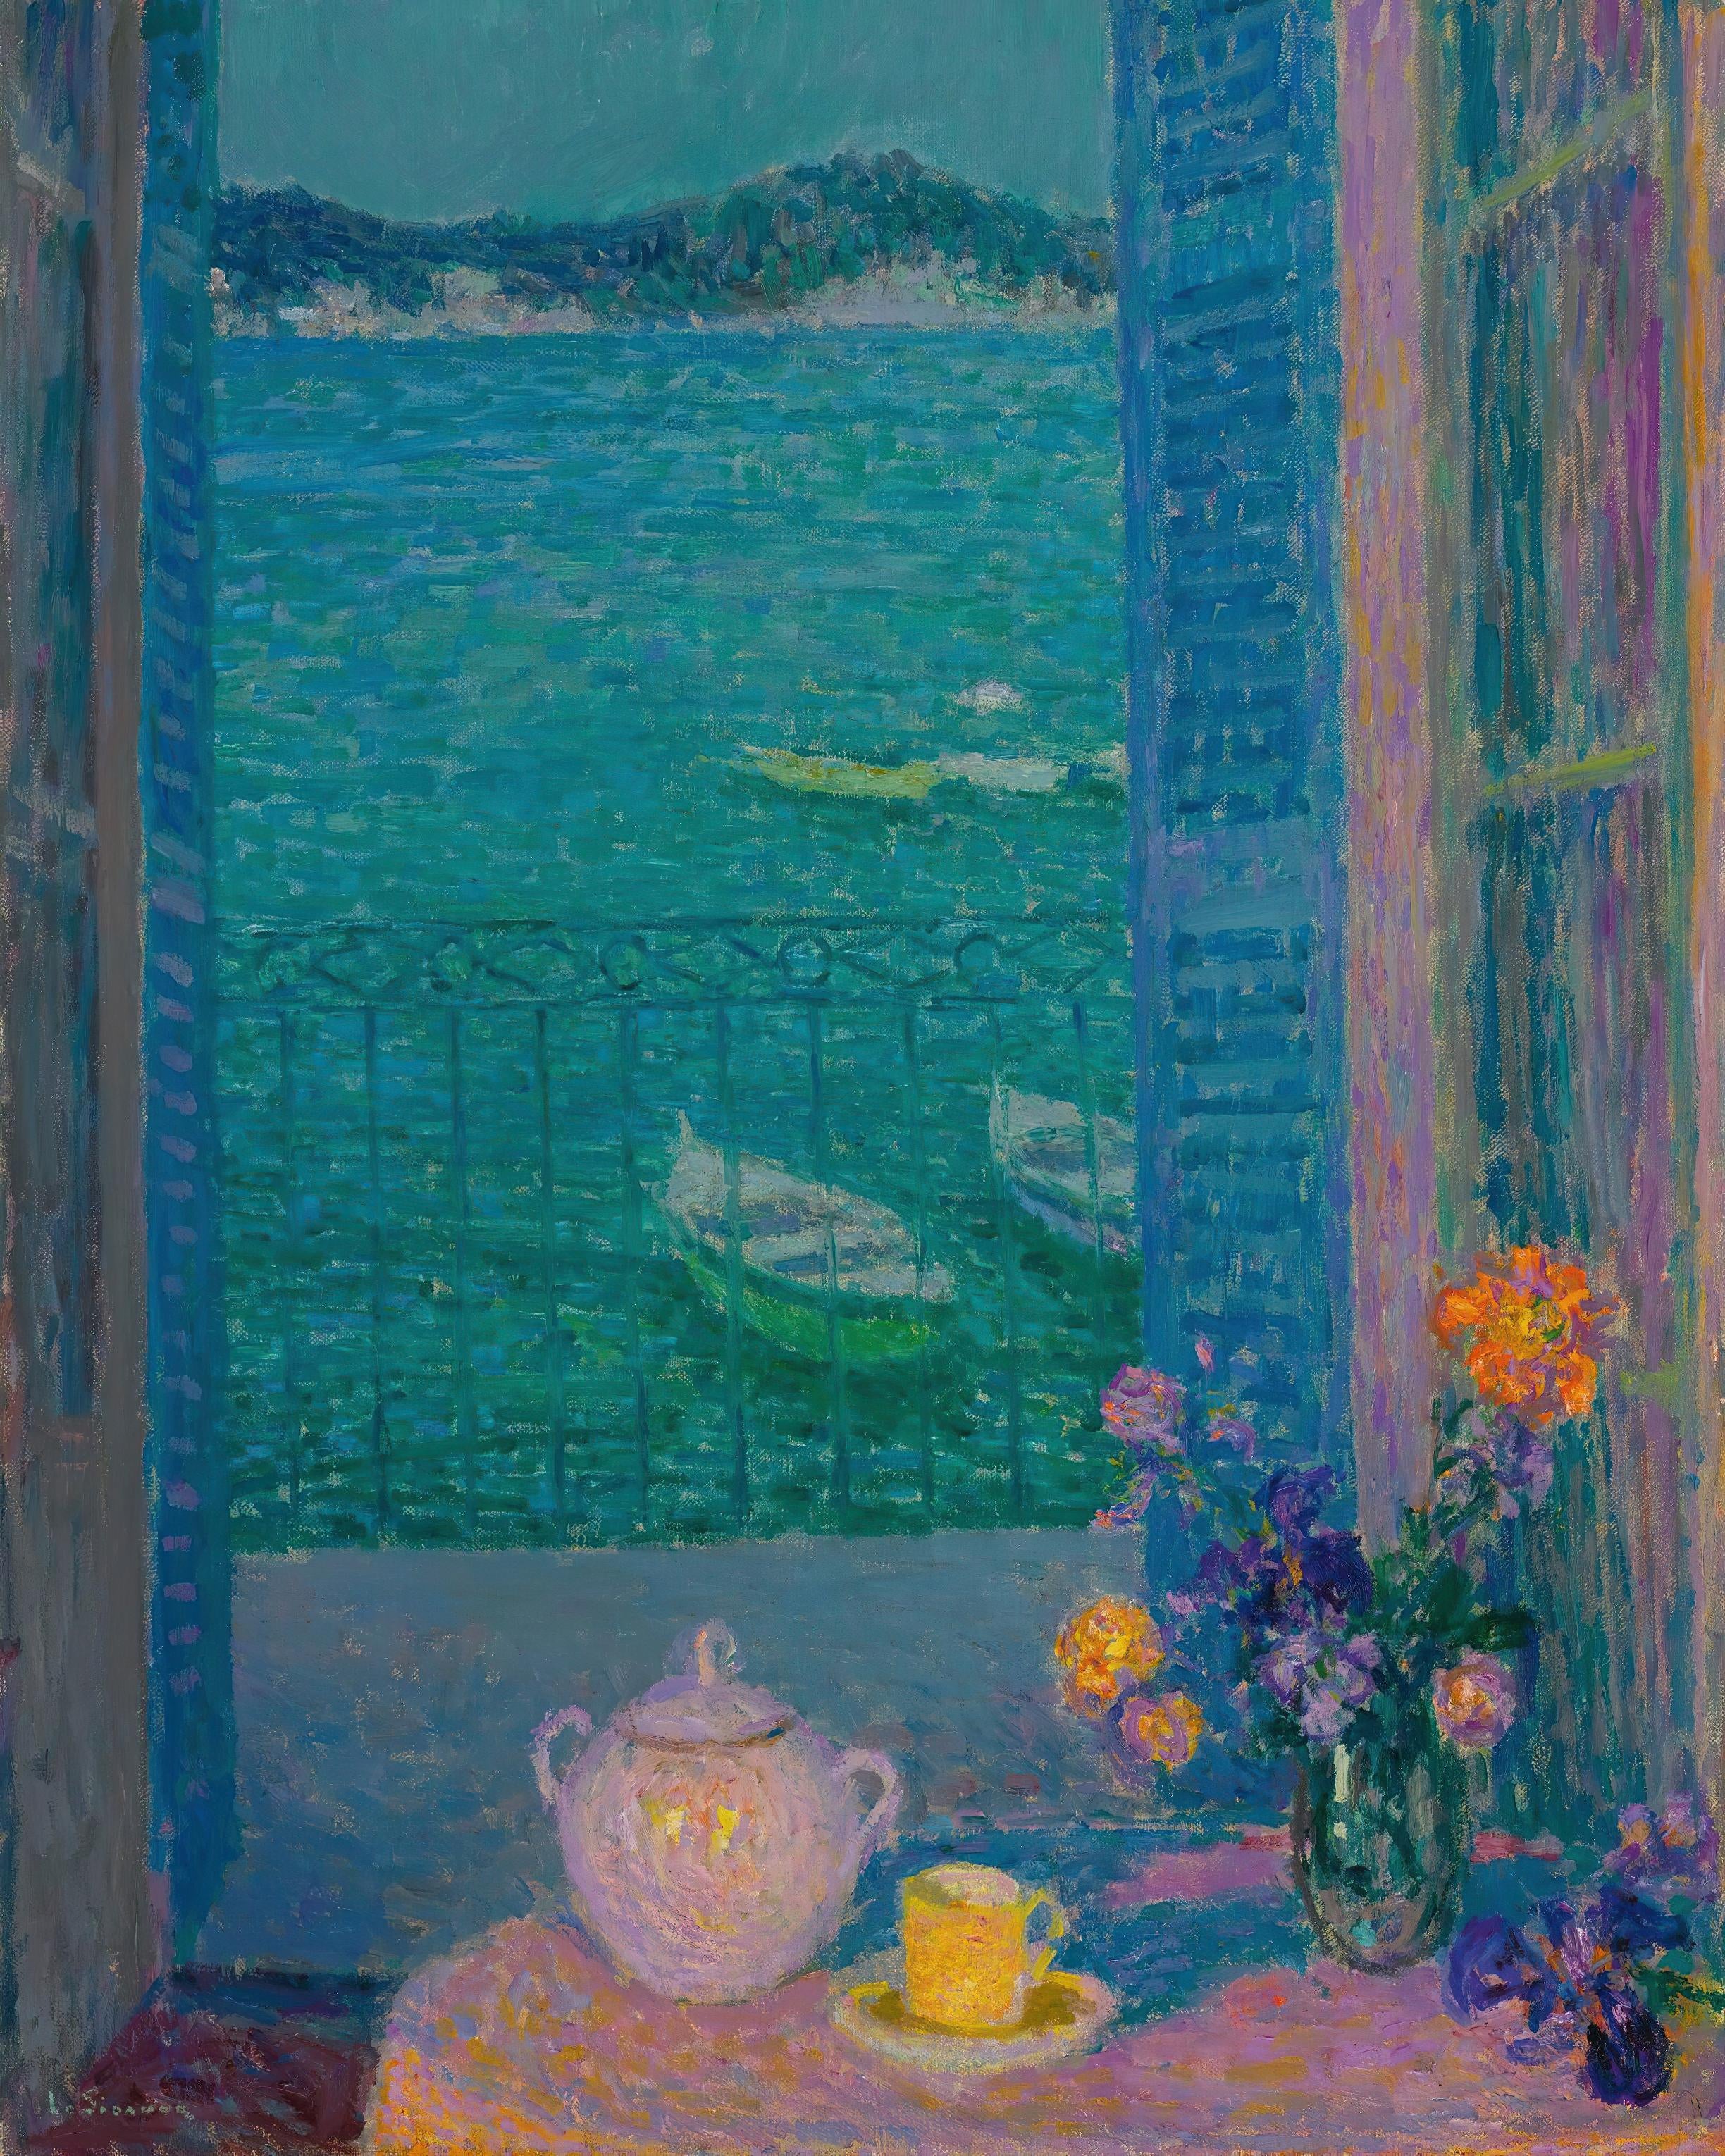 Artwork Painting Impressionism Boat Flowers Cup Water 2448x3060